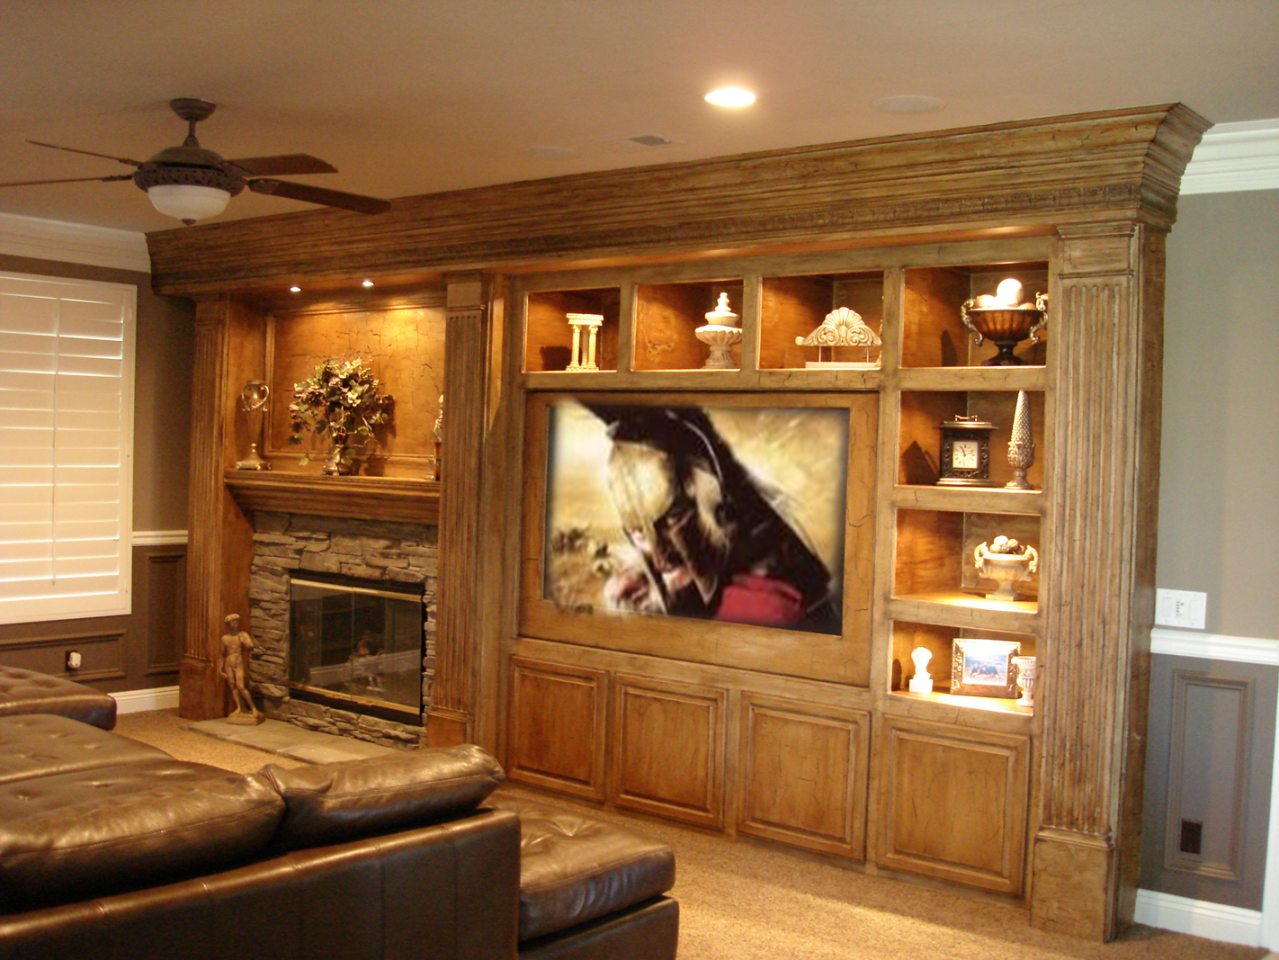 Fireplace and tv offset in built in entertainment center